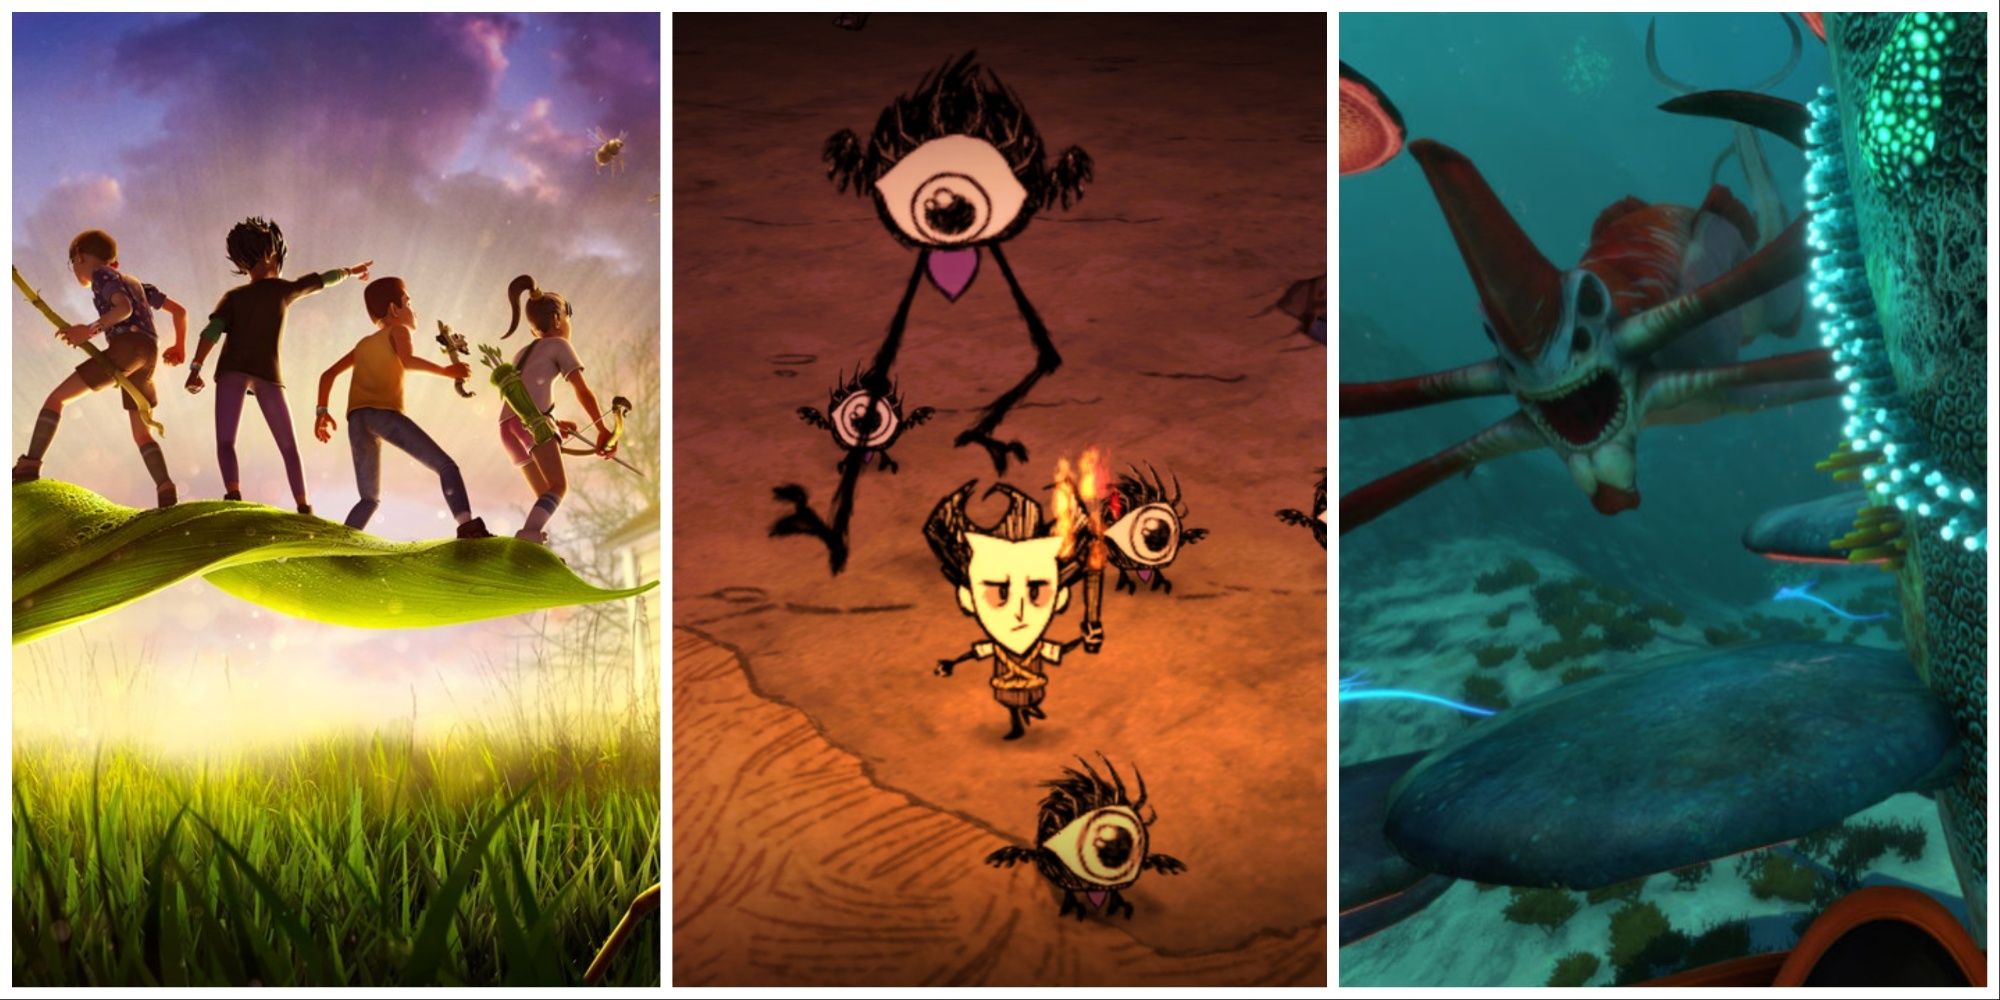 Grounded, Don't Starve, and Subnautica